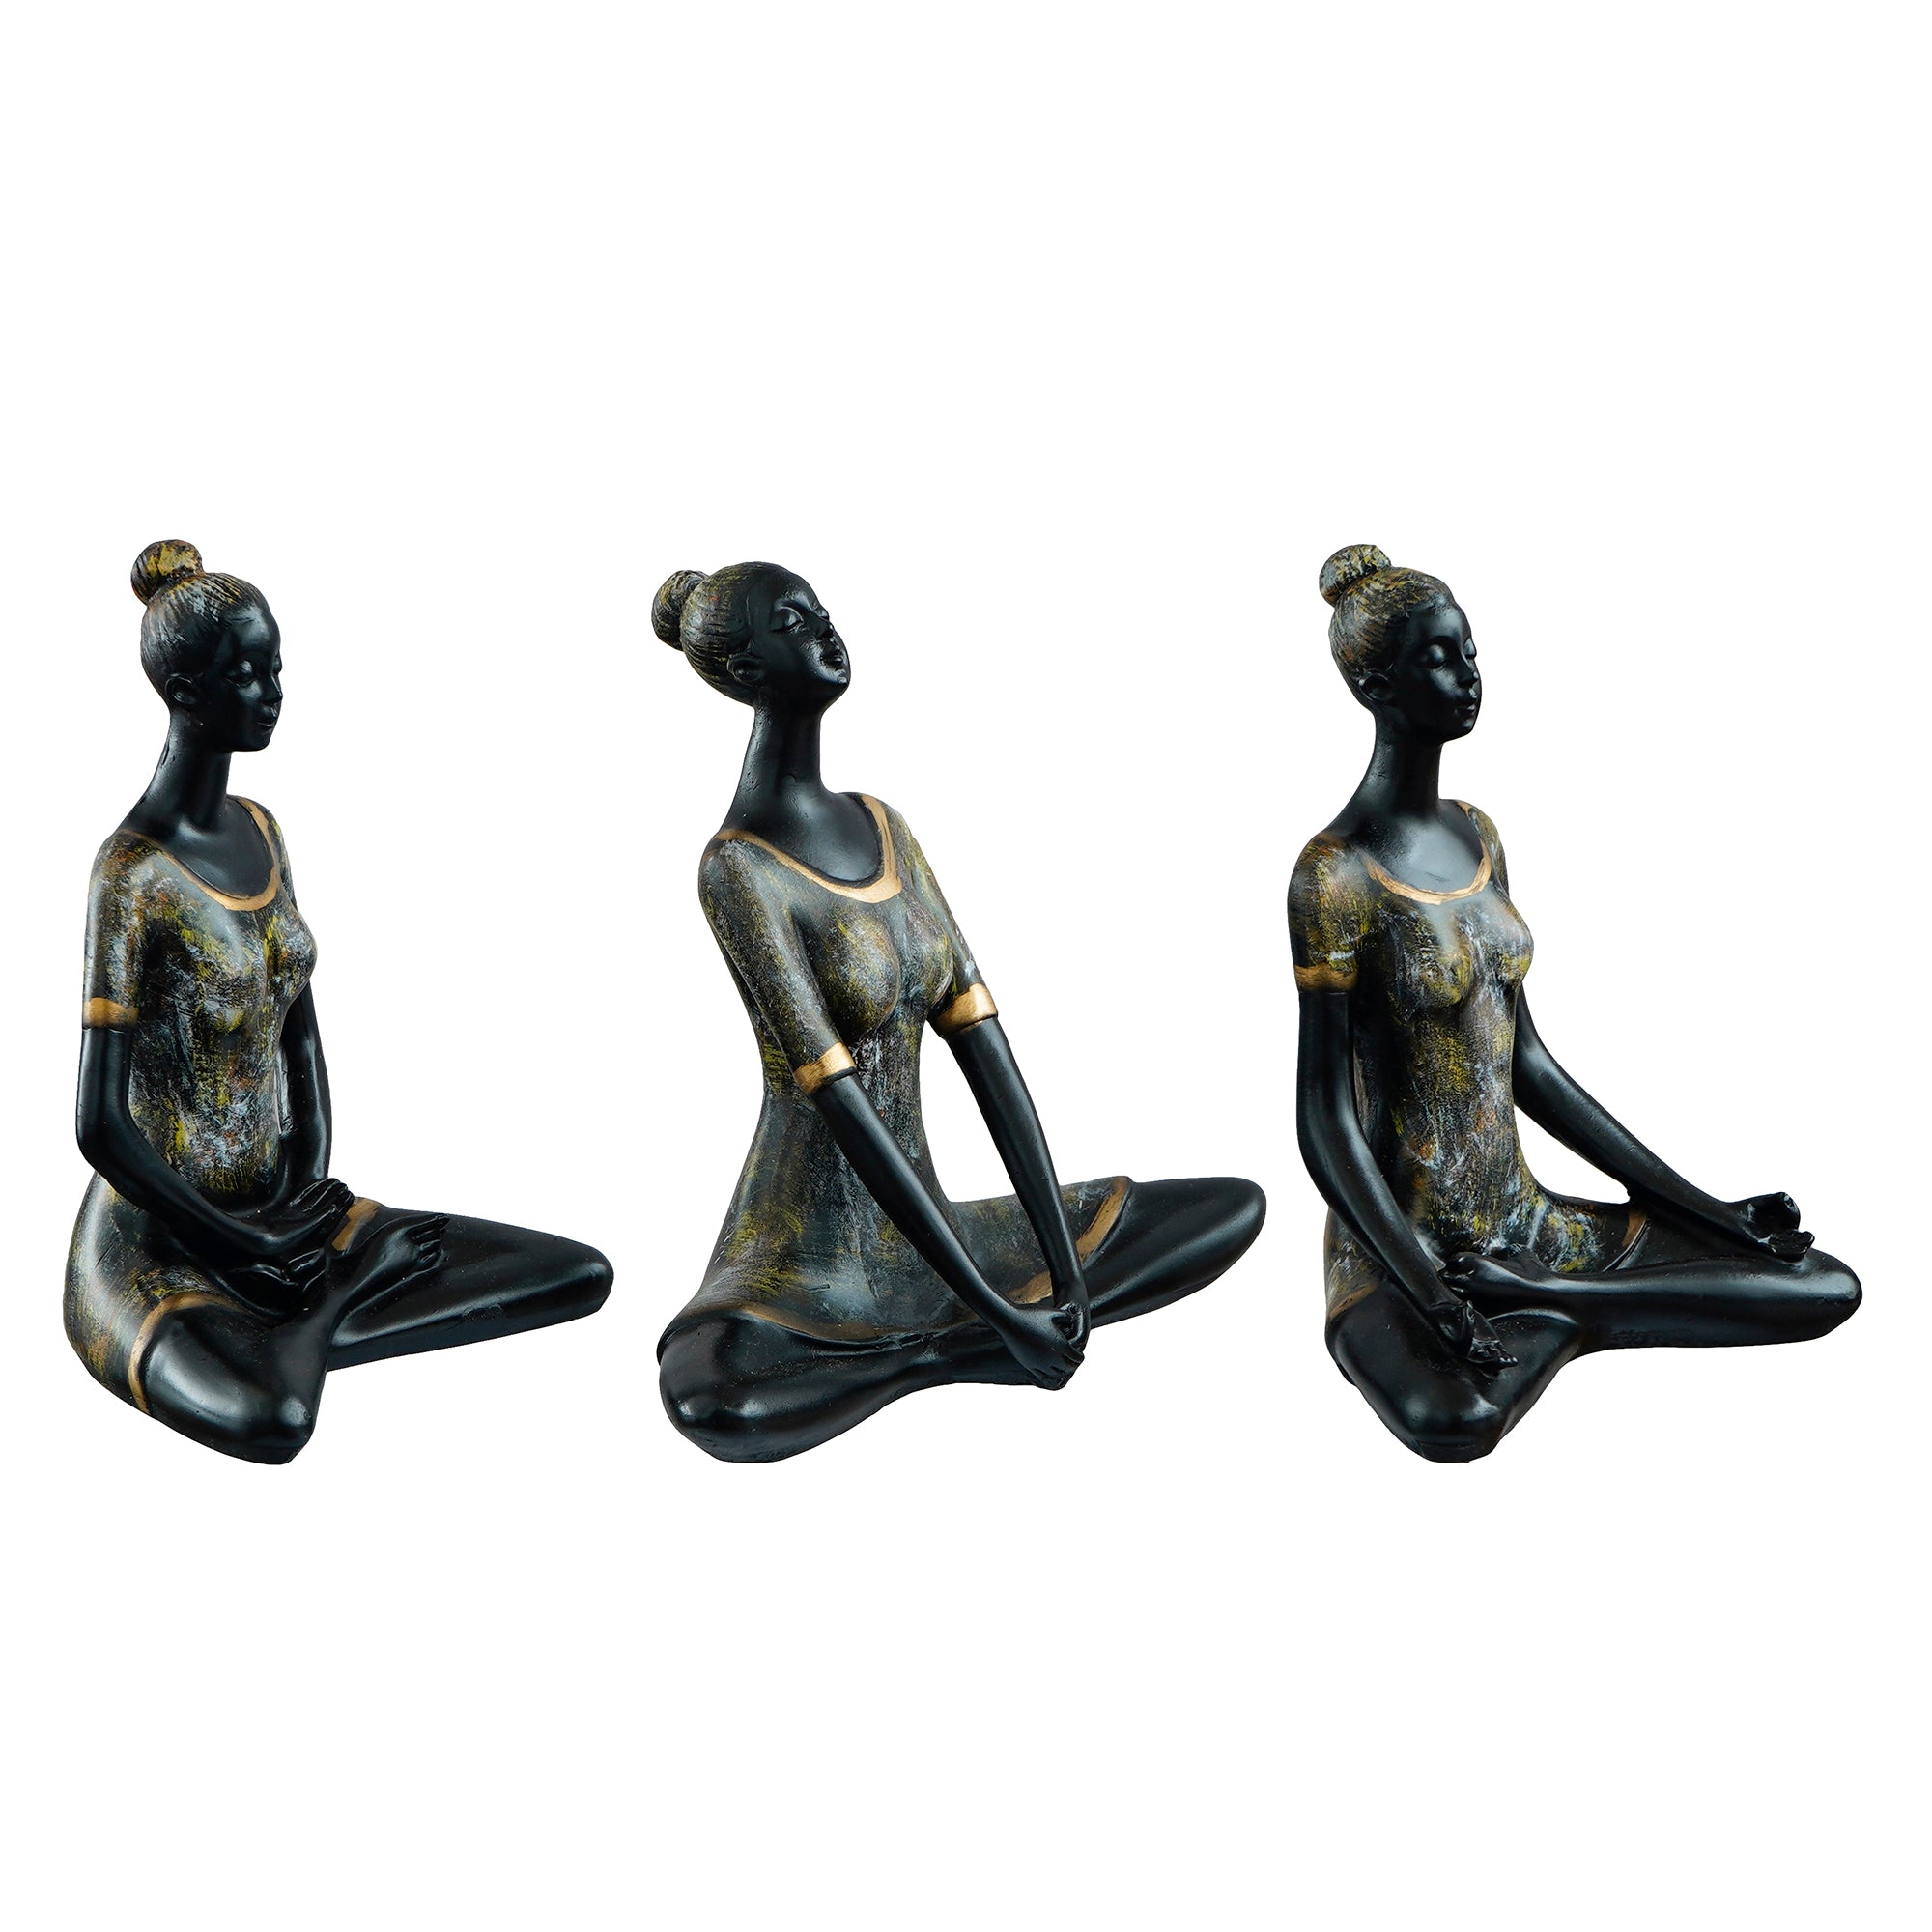 Set of 3 Ladies in Sukhasana, Padmasana, Butterfly Yoga Poses Handcrafted Decorative Polyresin Showpieces 5